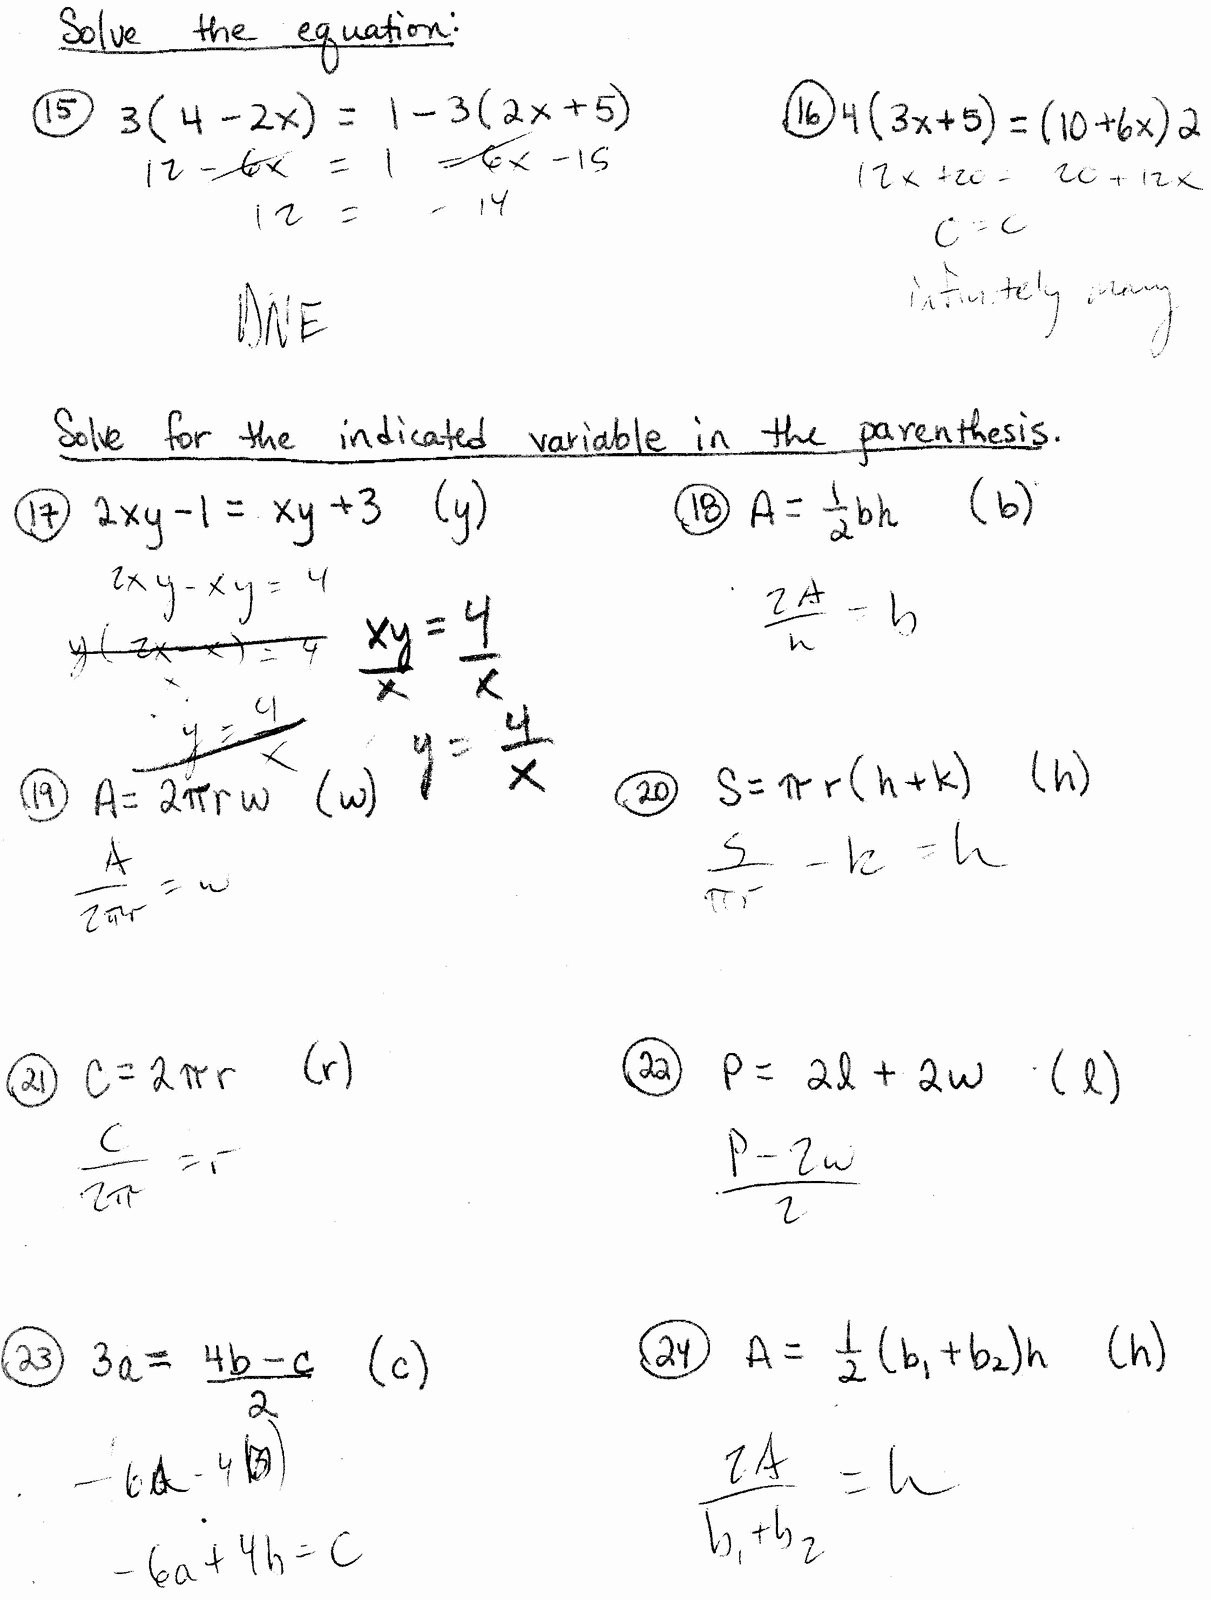 literal equations worksheet answers new mr suominen s math homepage linear literal equations of literal equations worksheet answers